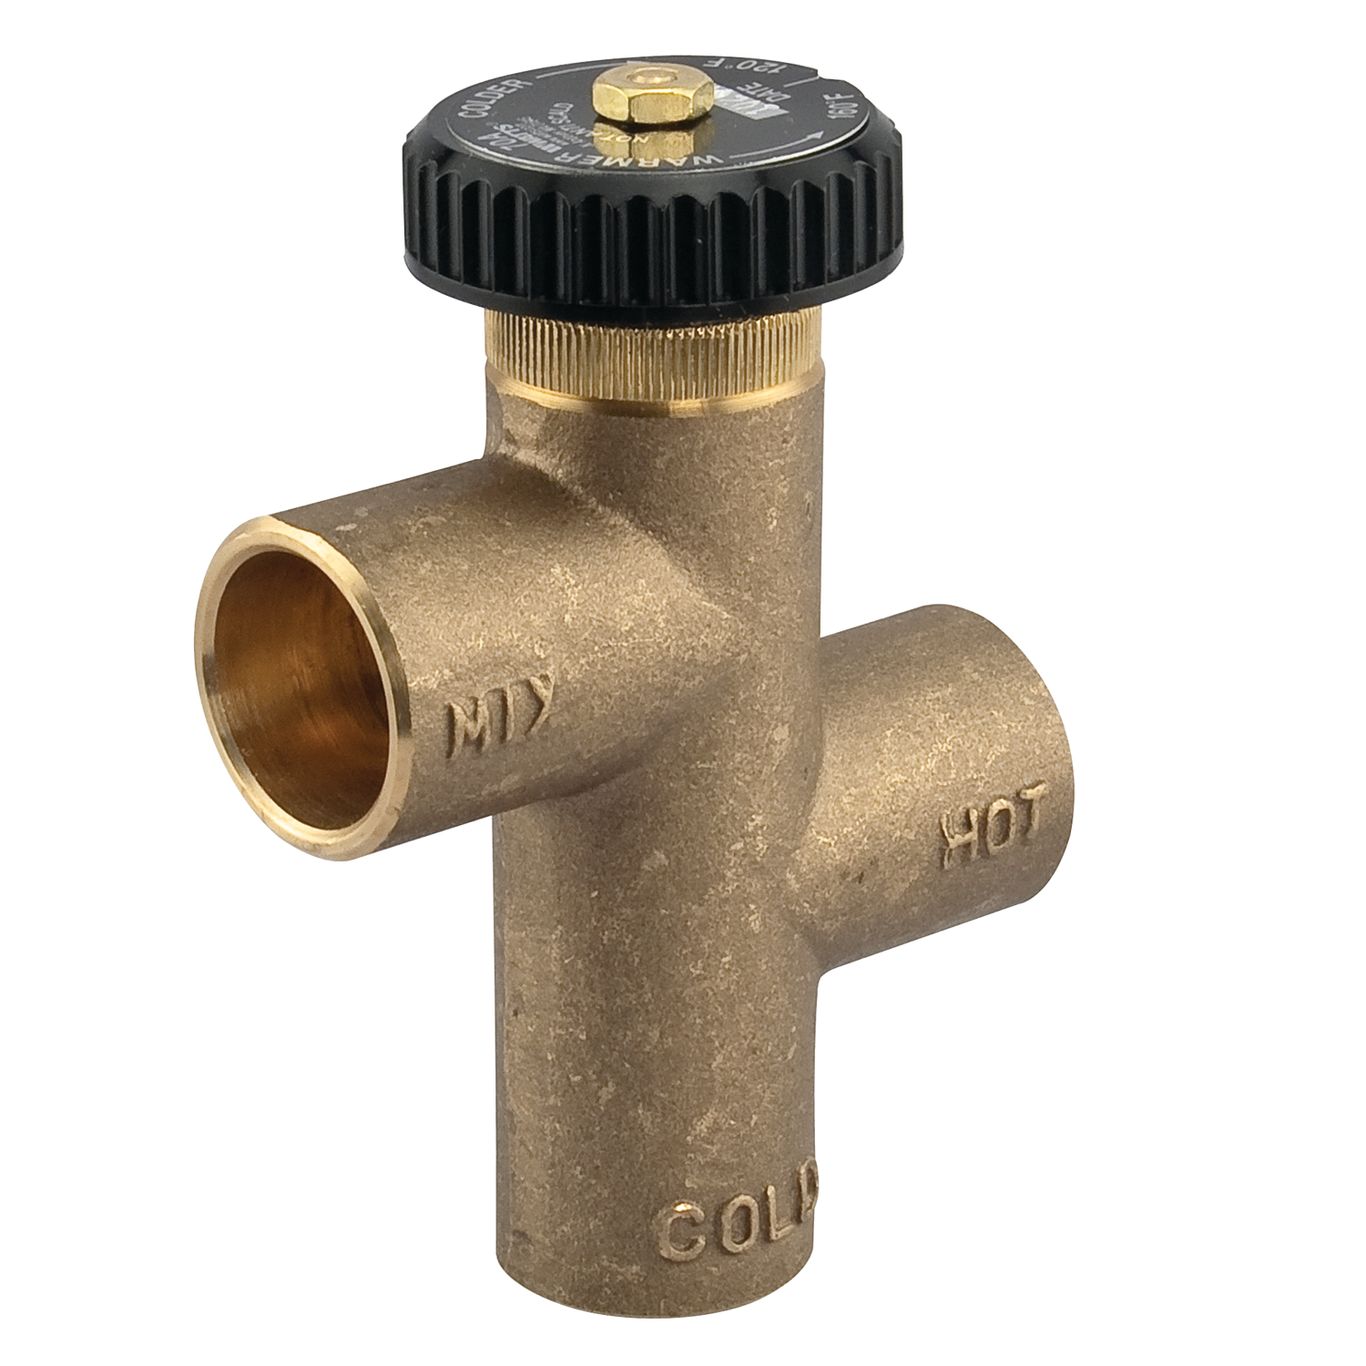 0559131 - 1/2 In Lead Free Low Temperature Hot Water Extender Mixing Valve With Solder Connect